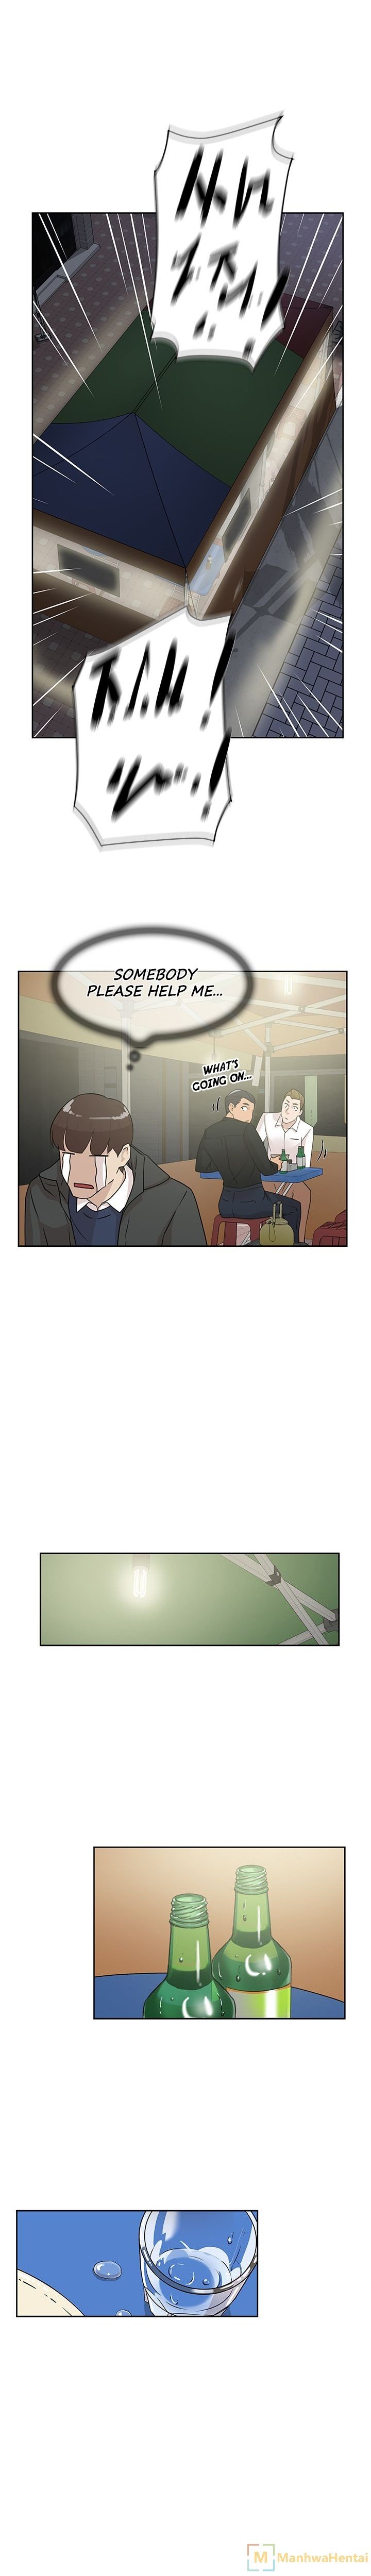 office-affairs-chap-31-6